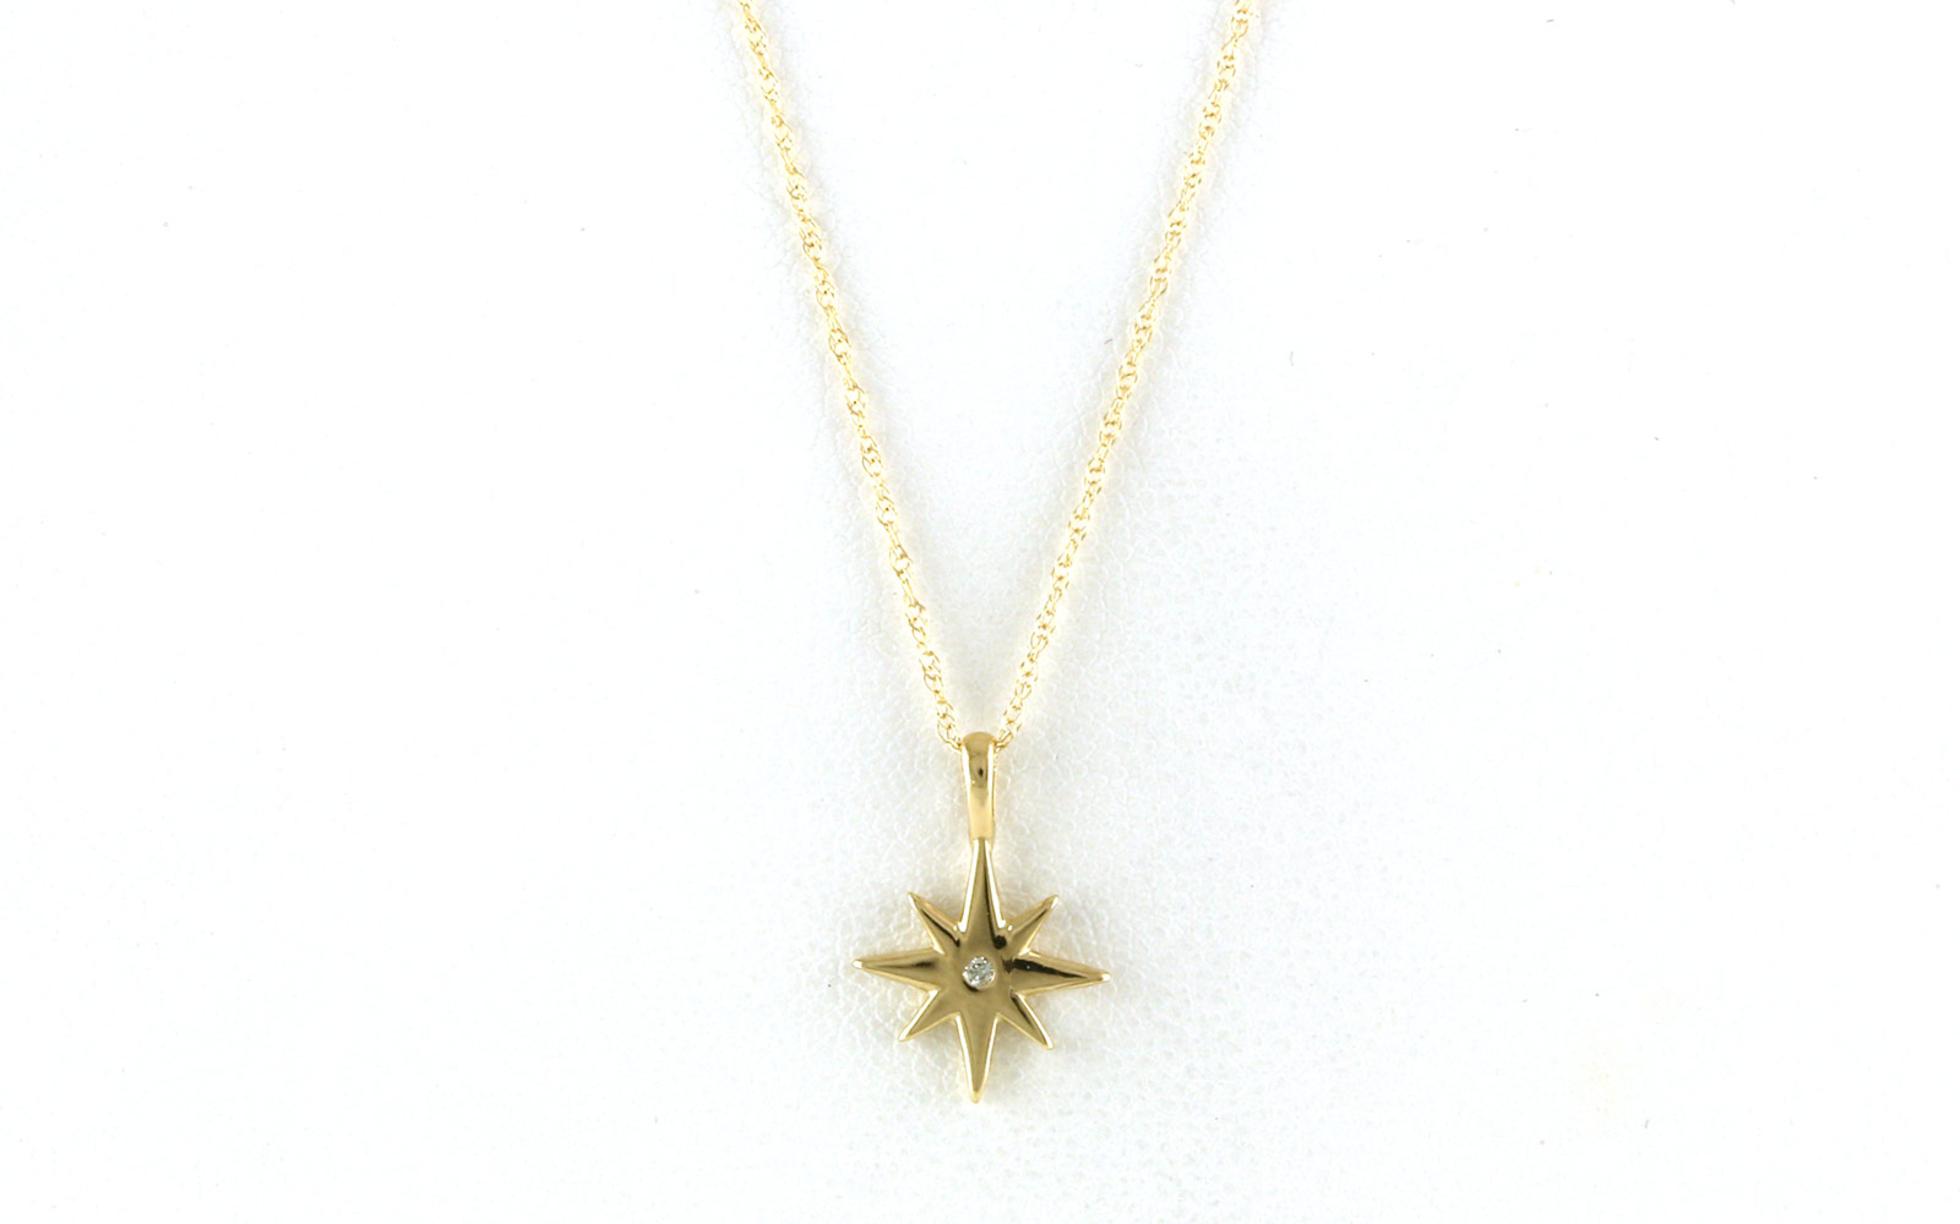 Starburst-style Diamond Necklace in Yellow Gold (0.01cts)